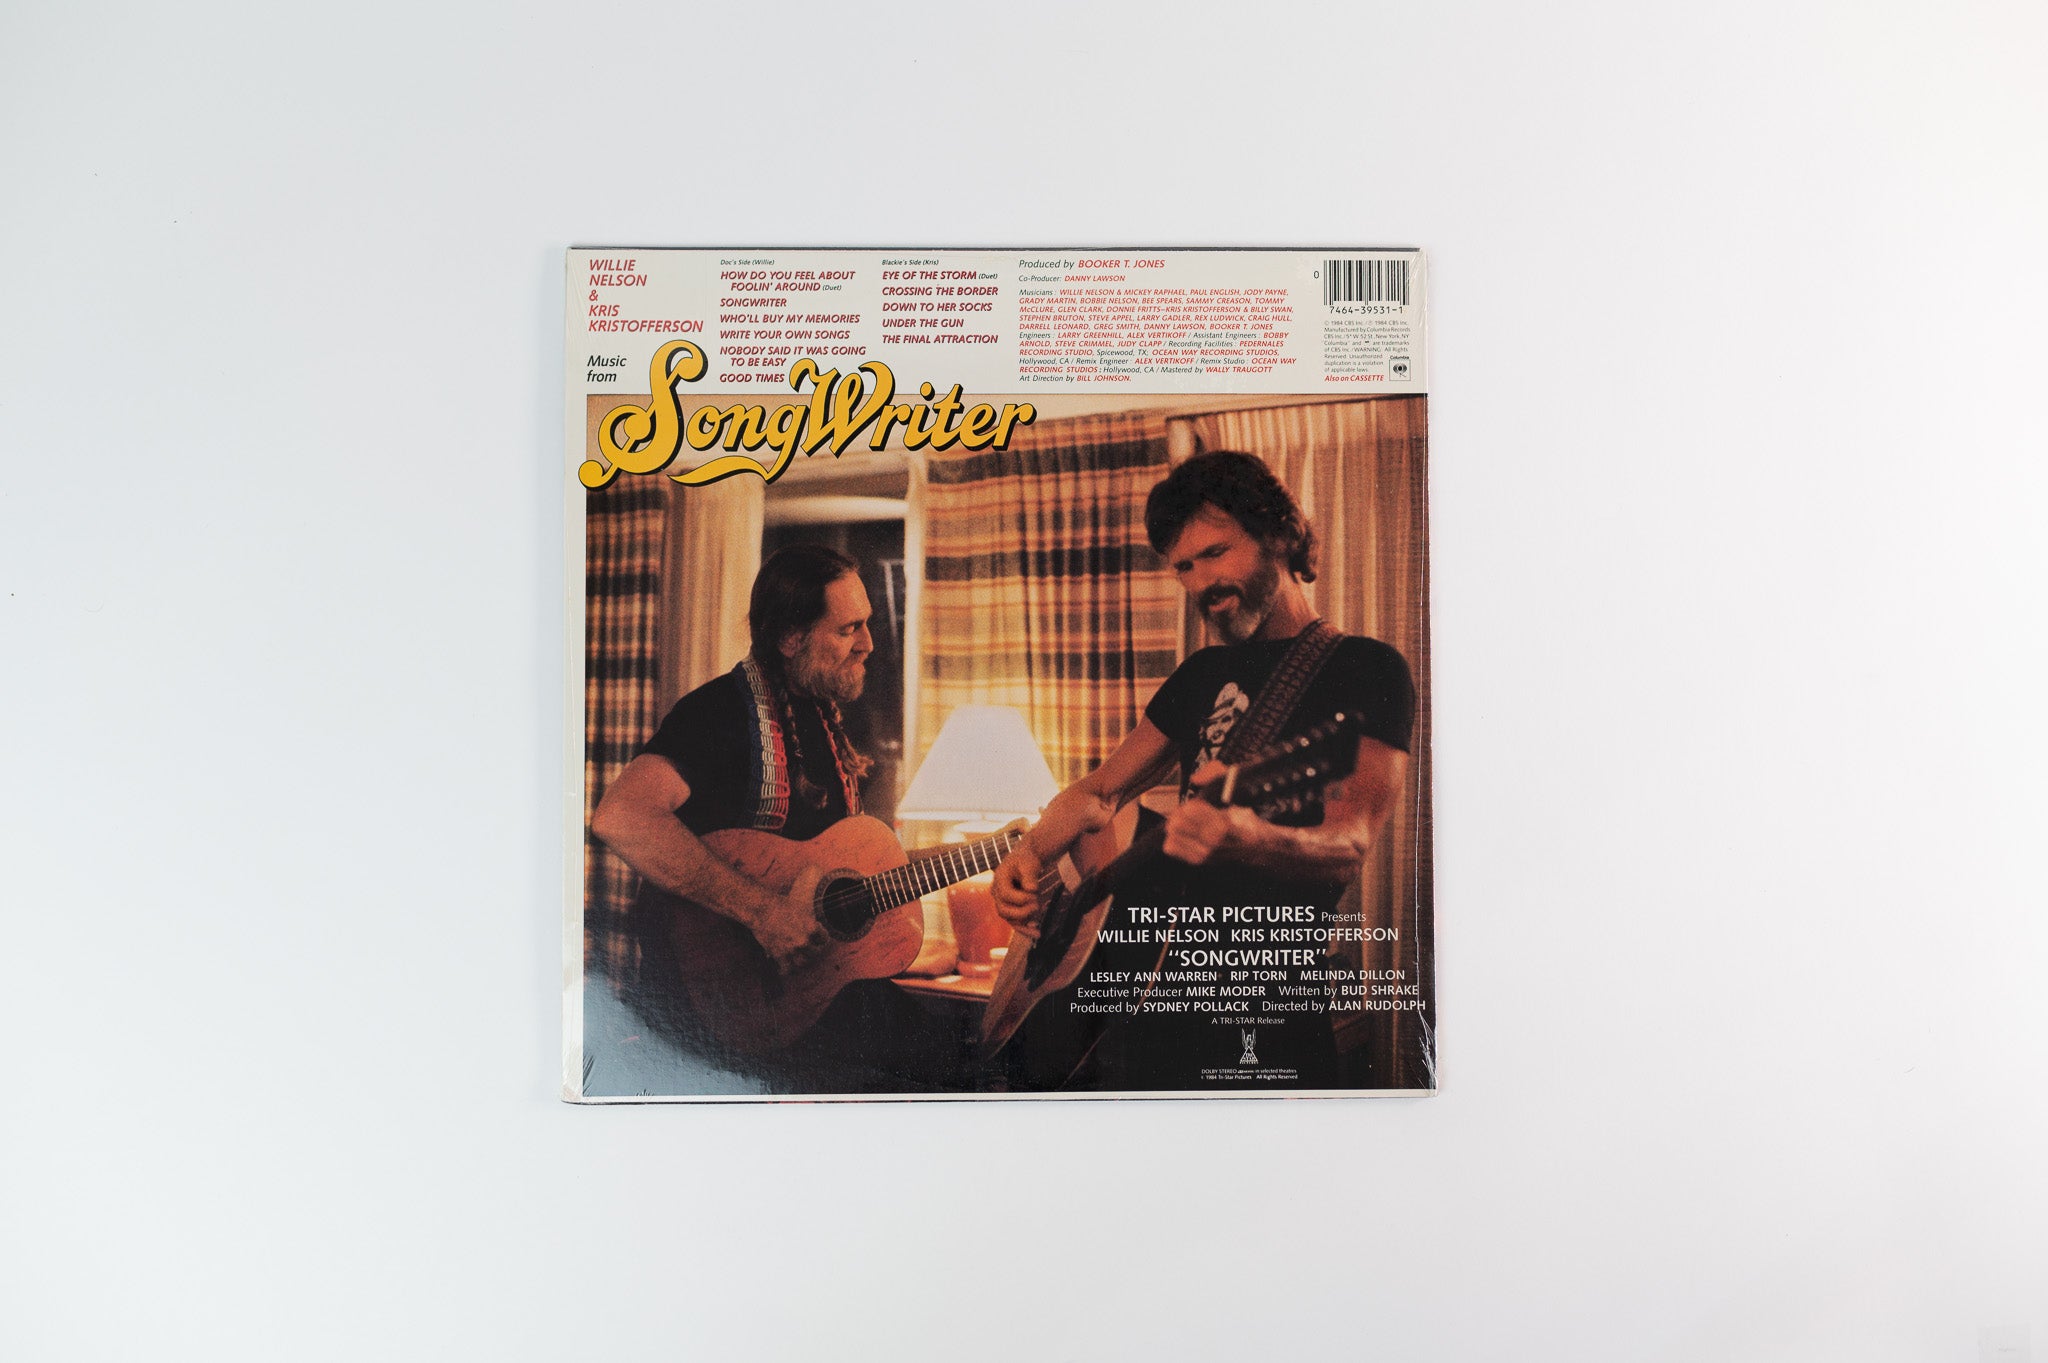 Willie Nelson - Music From Songwriter on Columbia Sealed